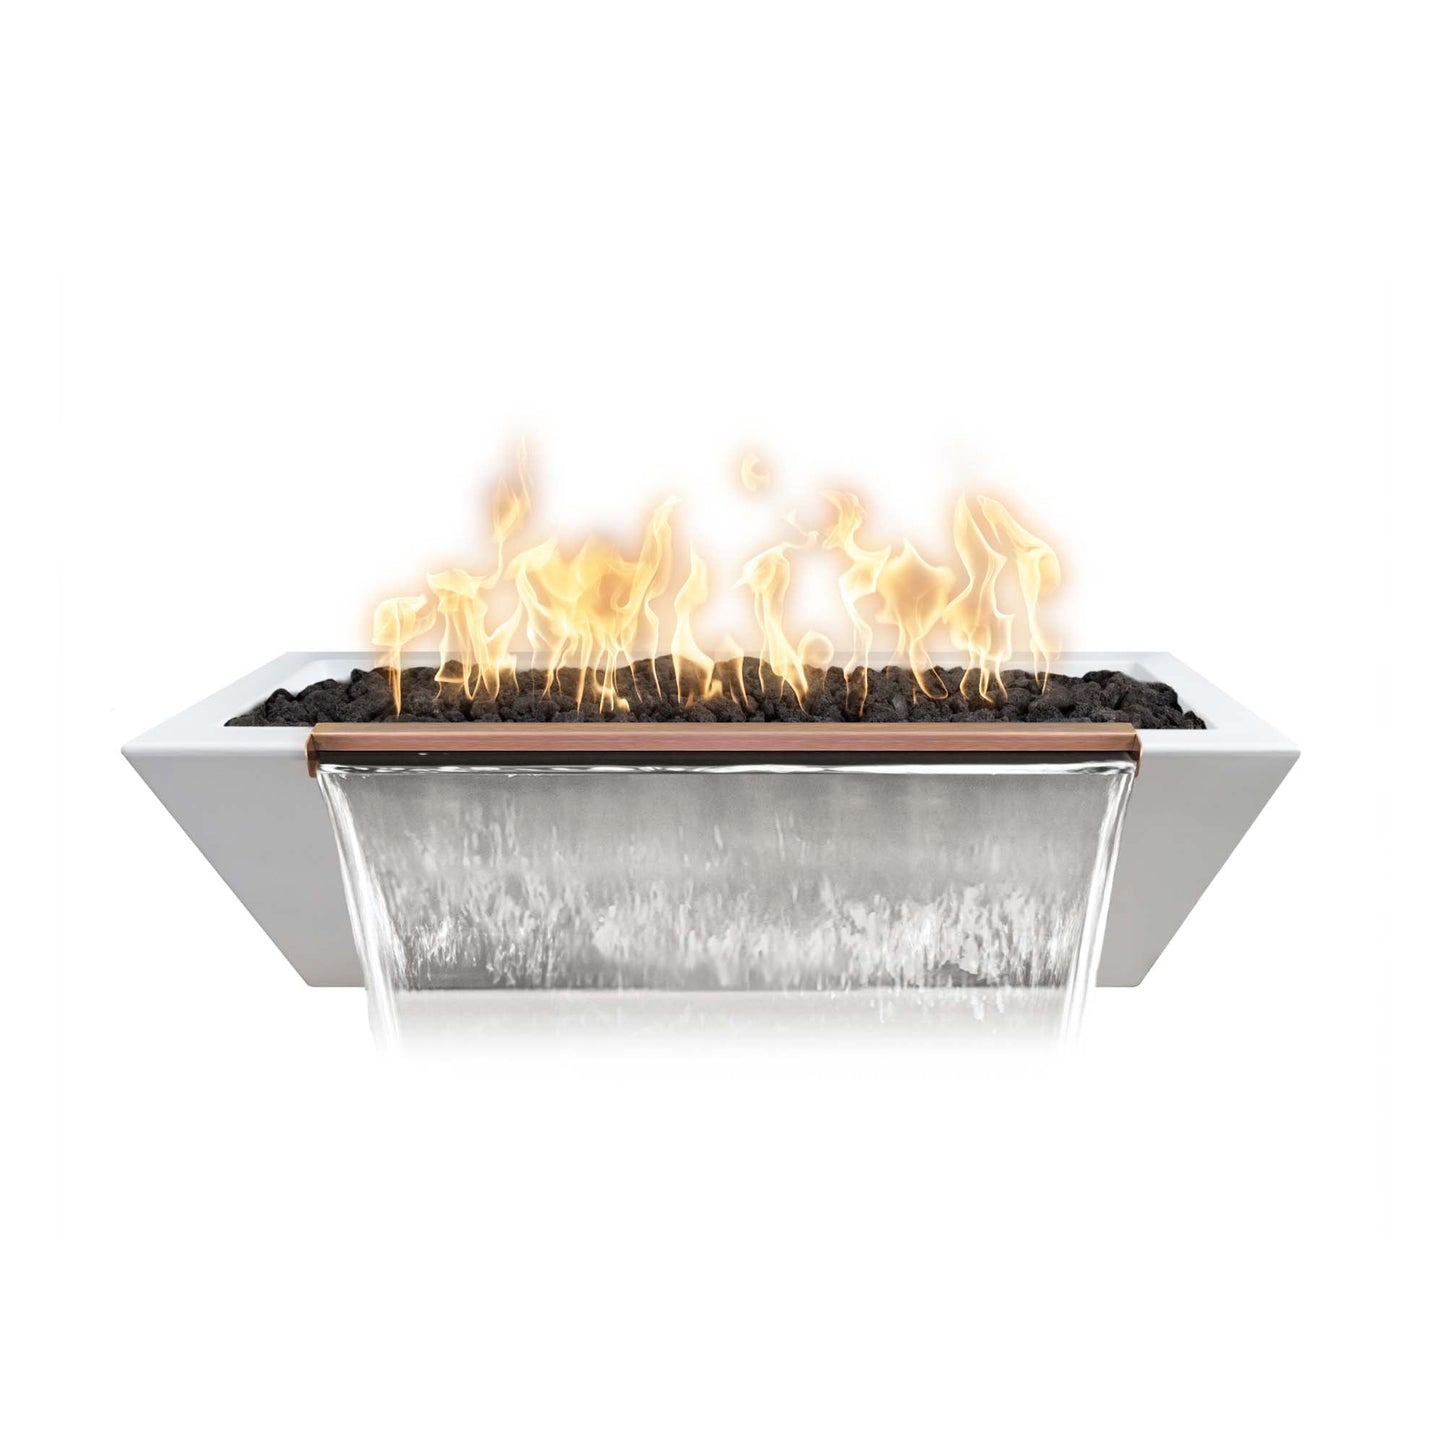 The Outdoor Plus Linear Maya 60" Black GFRC Concrete Liquid Propane Fire & Water Bowl with Match Lit with Flame Sense Ignition